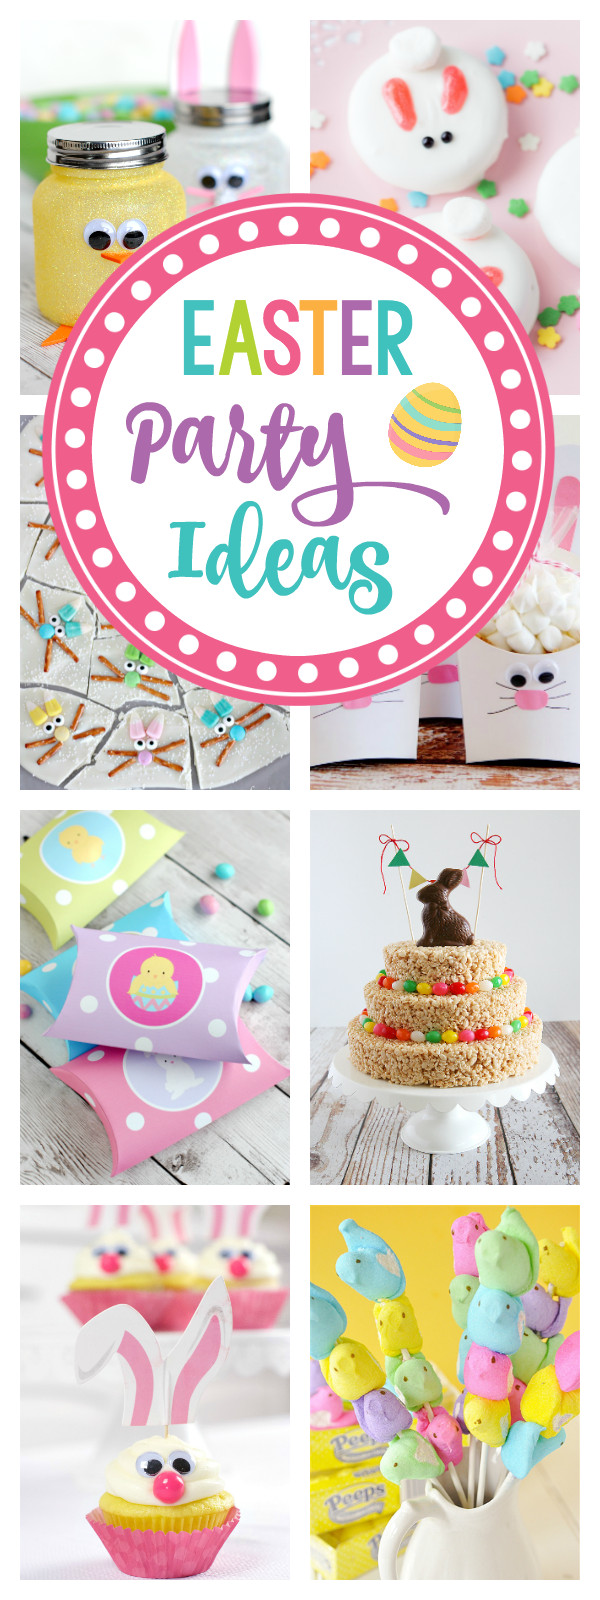 Decorating Ideas For Easter Party
 25 Fun Easter Party Ideas for Kids – Fun Squared